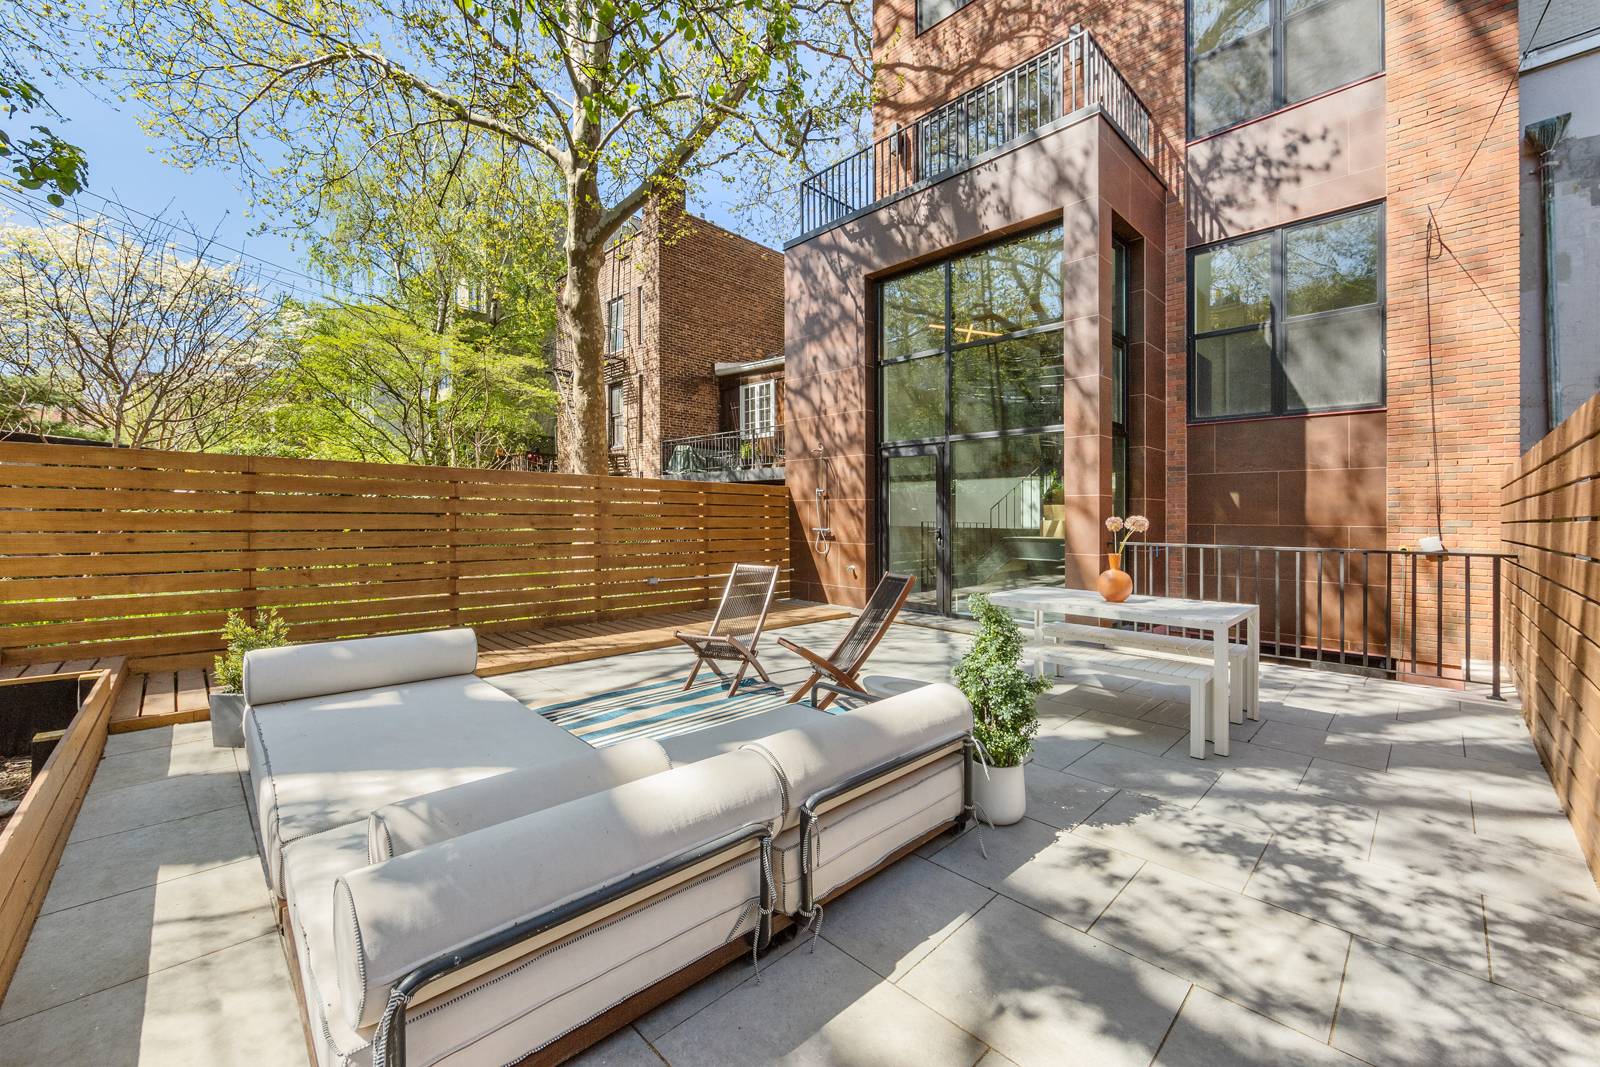 The 38 Butler Street condominium is a limited collection of three newly renovated homes in a four story townhouse located on a tree lined block in beautiful Cobble Hill.